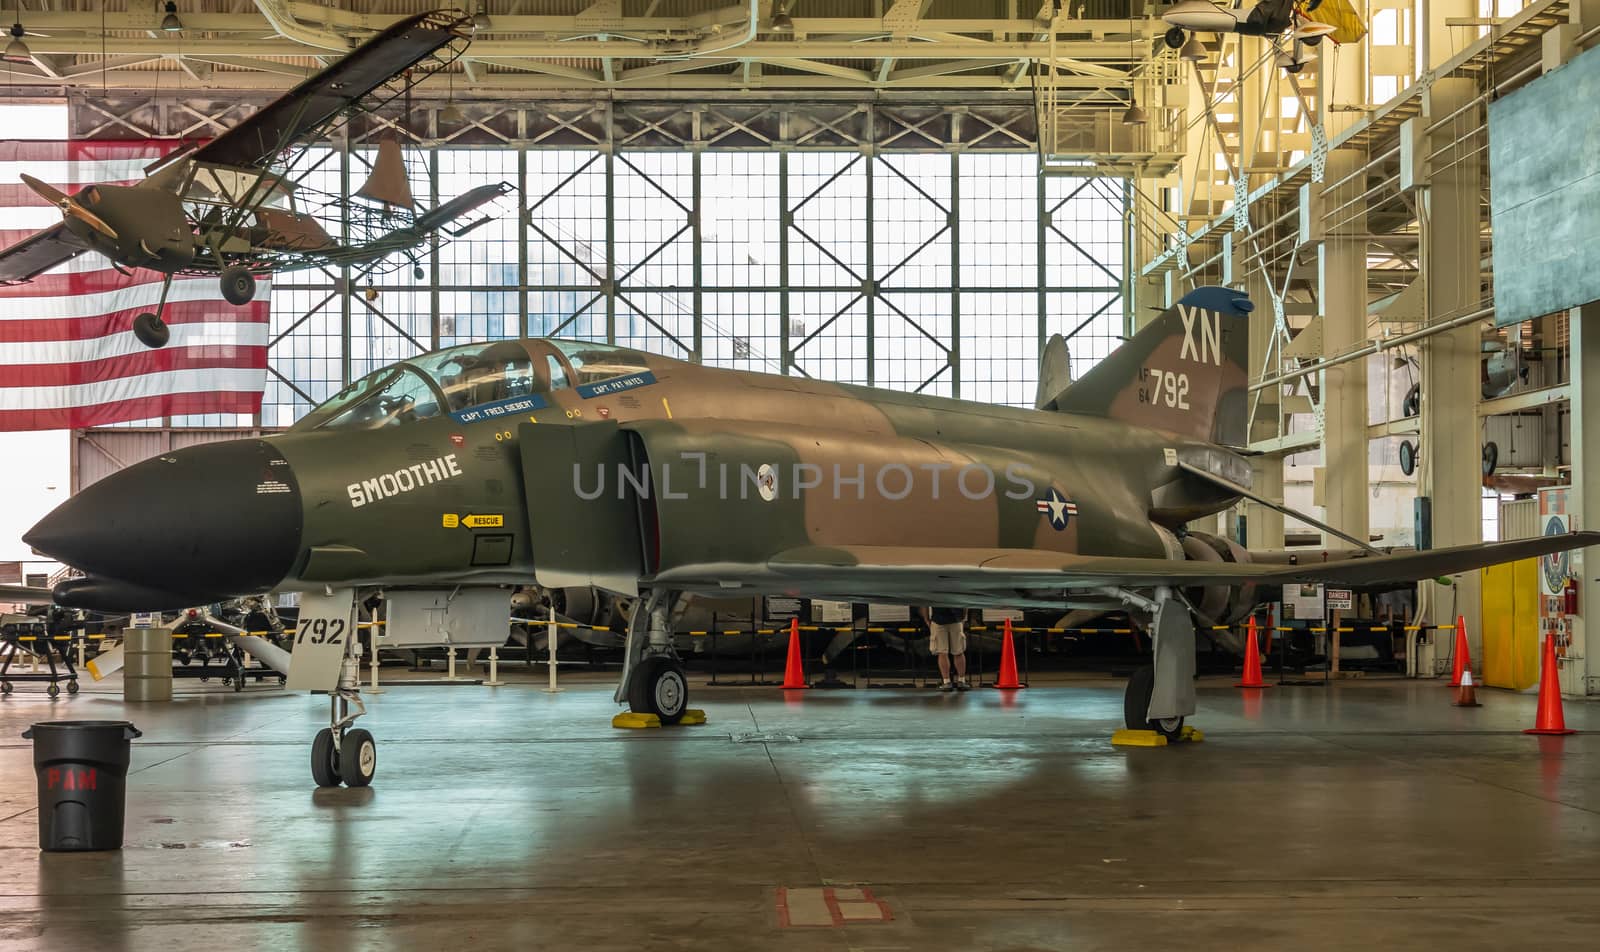 Oahu, Hawaii, USA. - January 10, 2020: Pearl Harbor Aviation Museum. Green XN 792 fighter jet Smoothie. Beige roof. Natural light through windows.